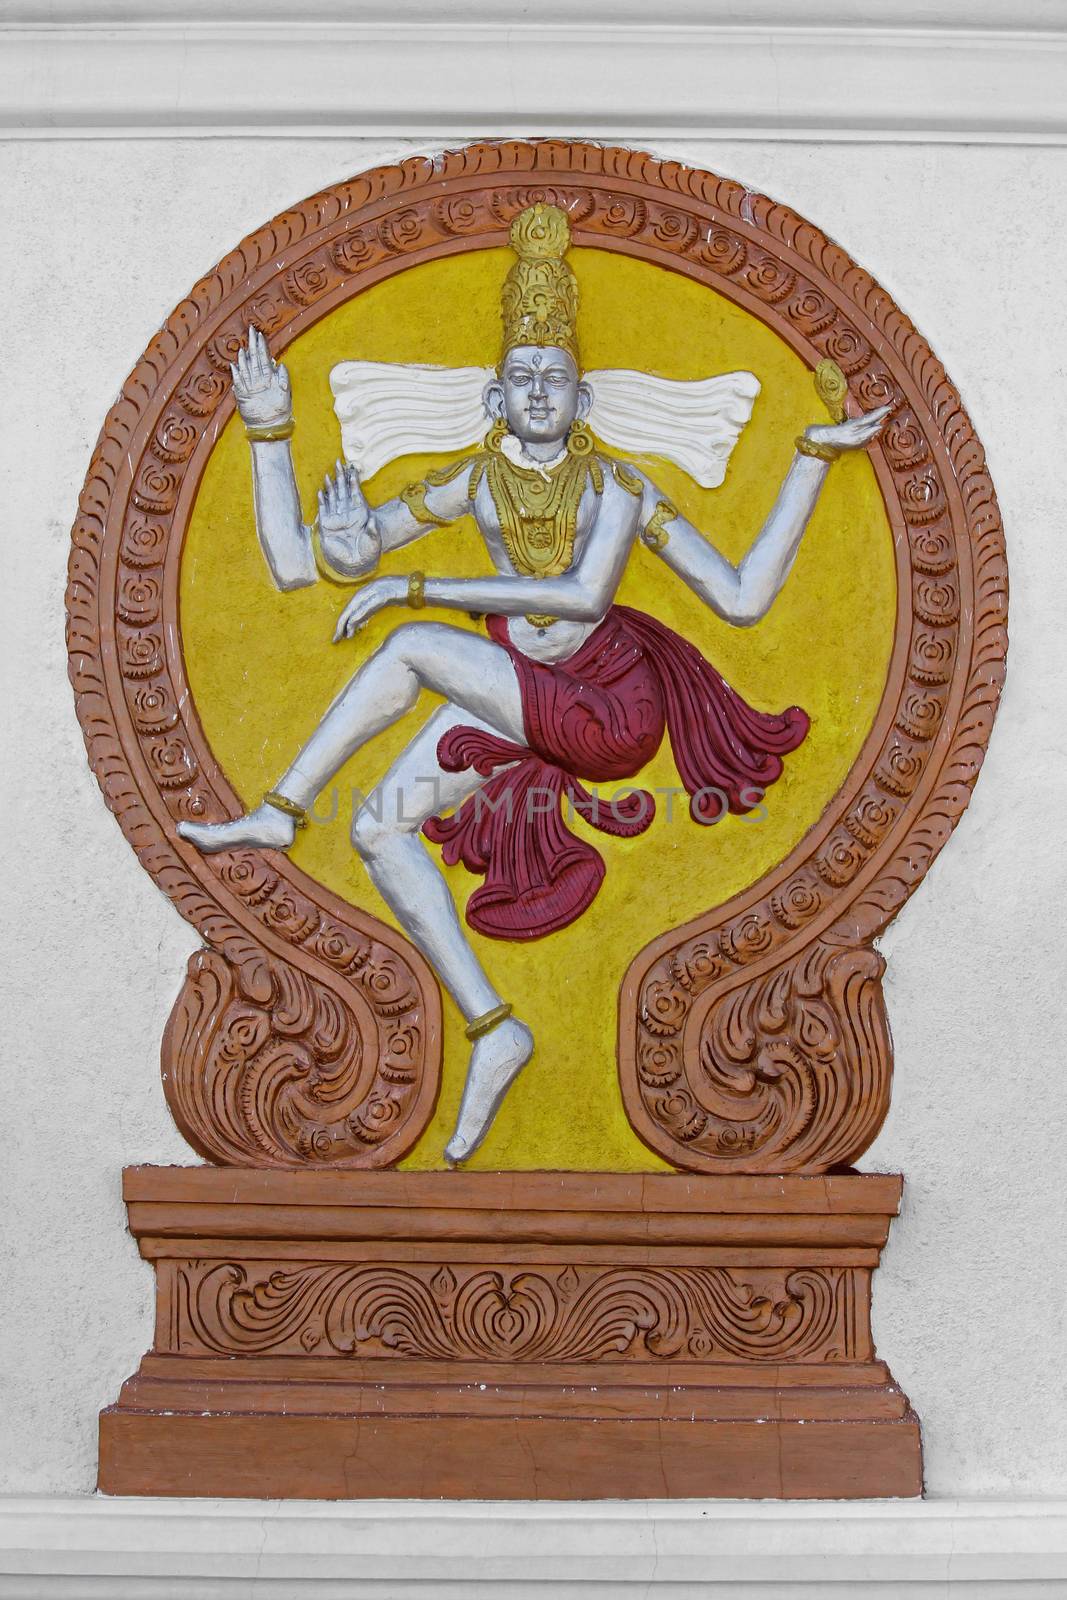 Sculpture of Nataraja at Shrinath Mhaskoba Temple, Kodit, Sasvad, Maharashtra, India. Nataraja The Lord or King of Dance, is a depiction of the god Shiva as the cosmic dancer who performs his divine dance to destroy a weary universe and make preparations for the god Brahma to start the process of creation.